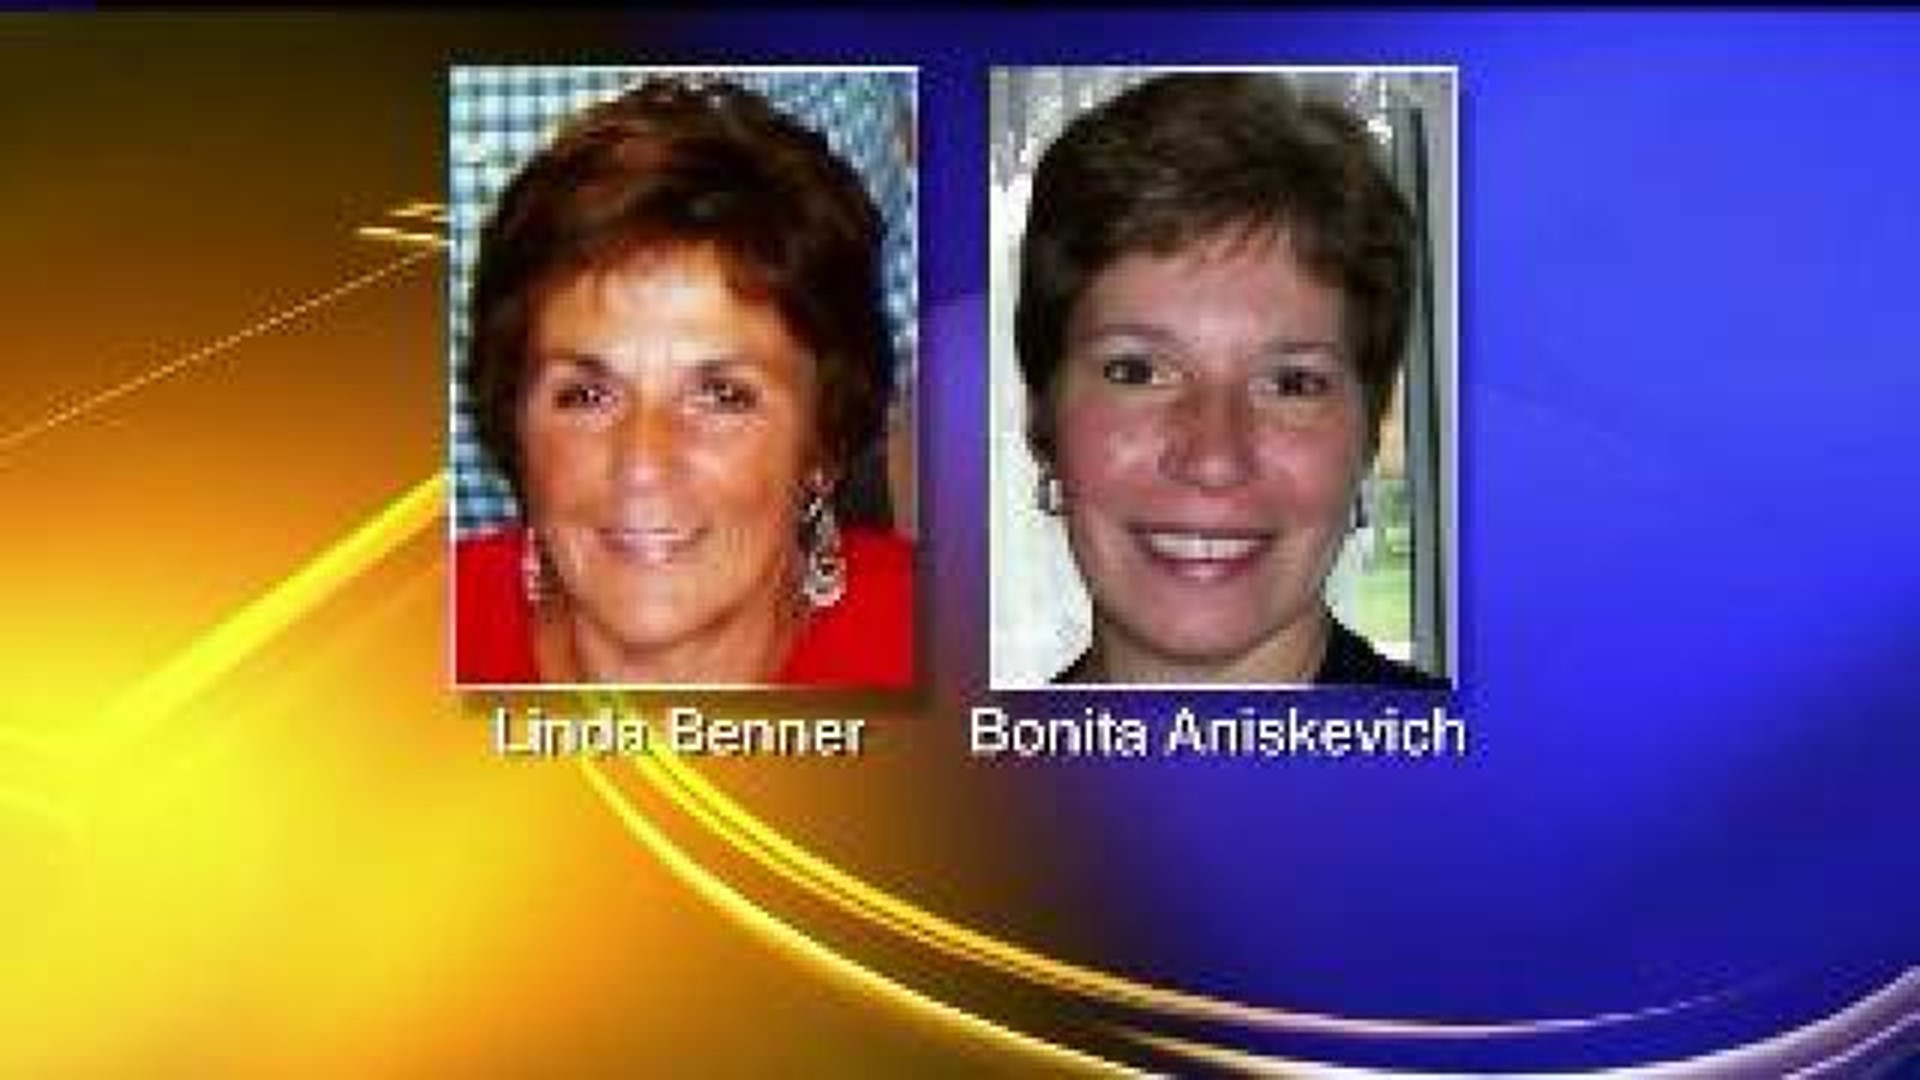 Township Supervisor And Friend Die In Crash